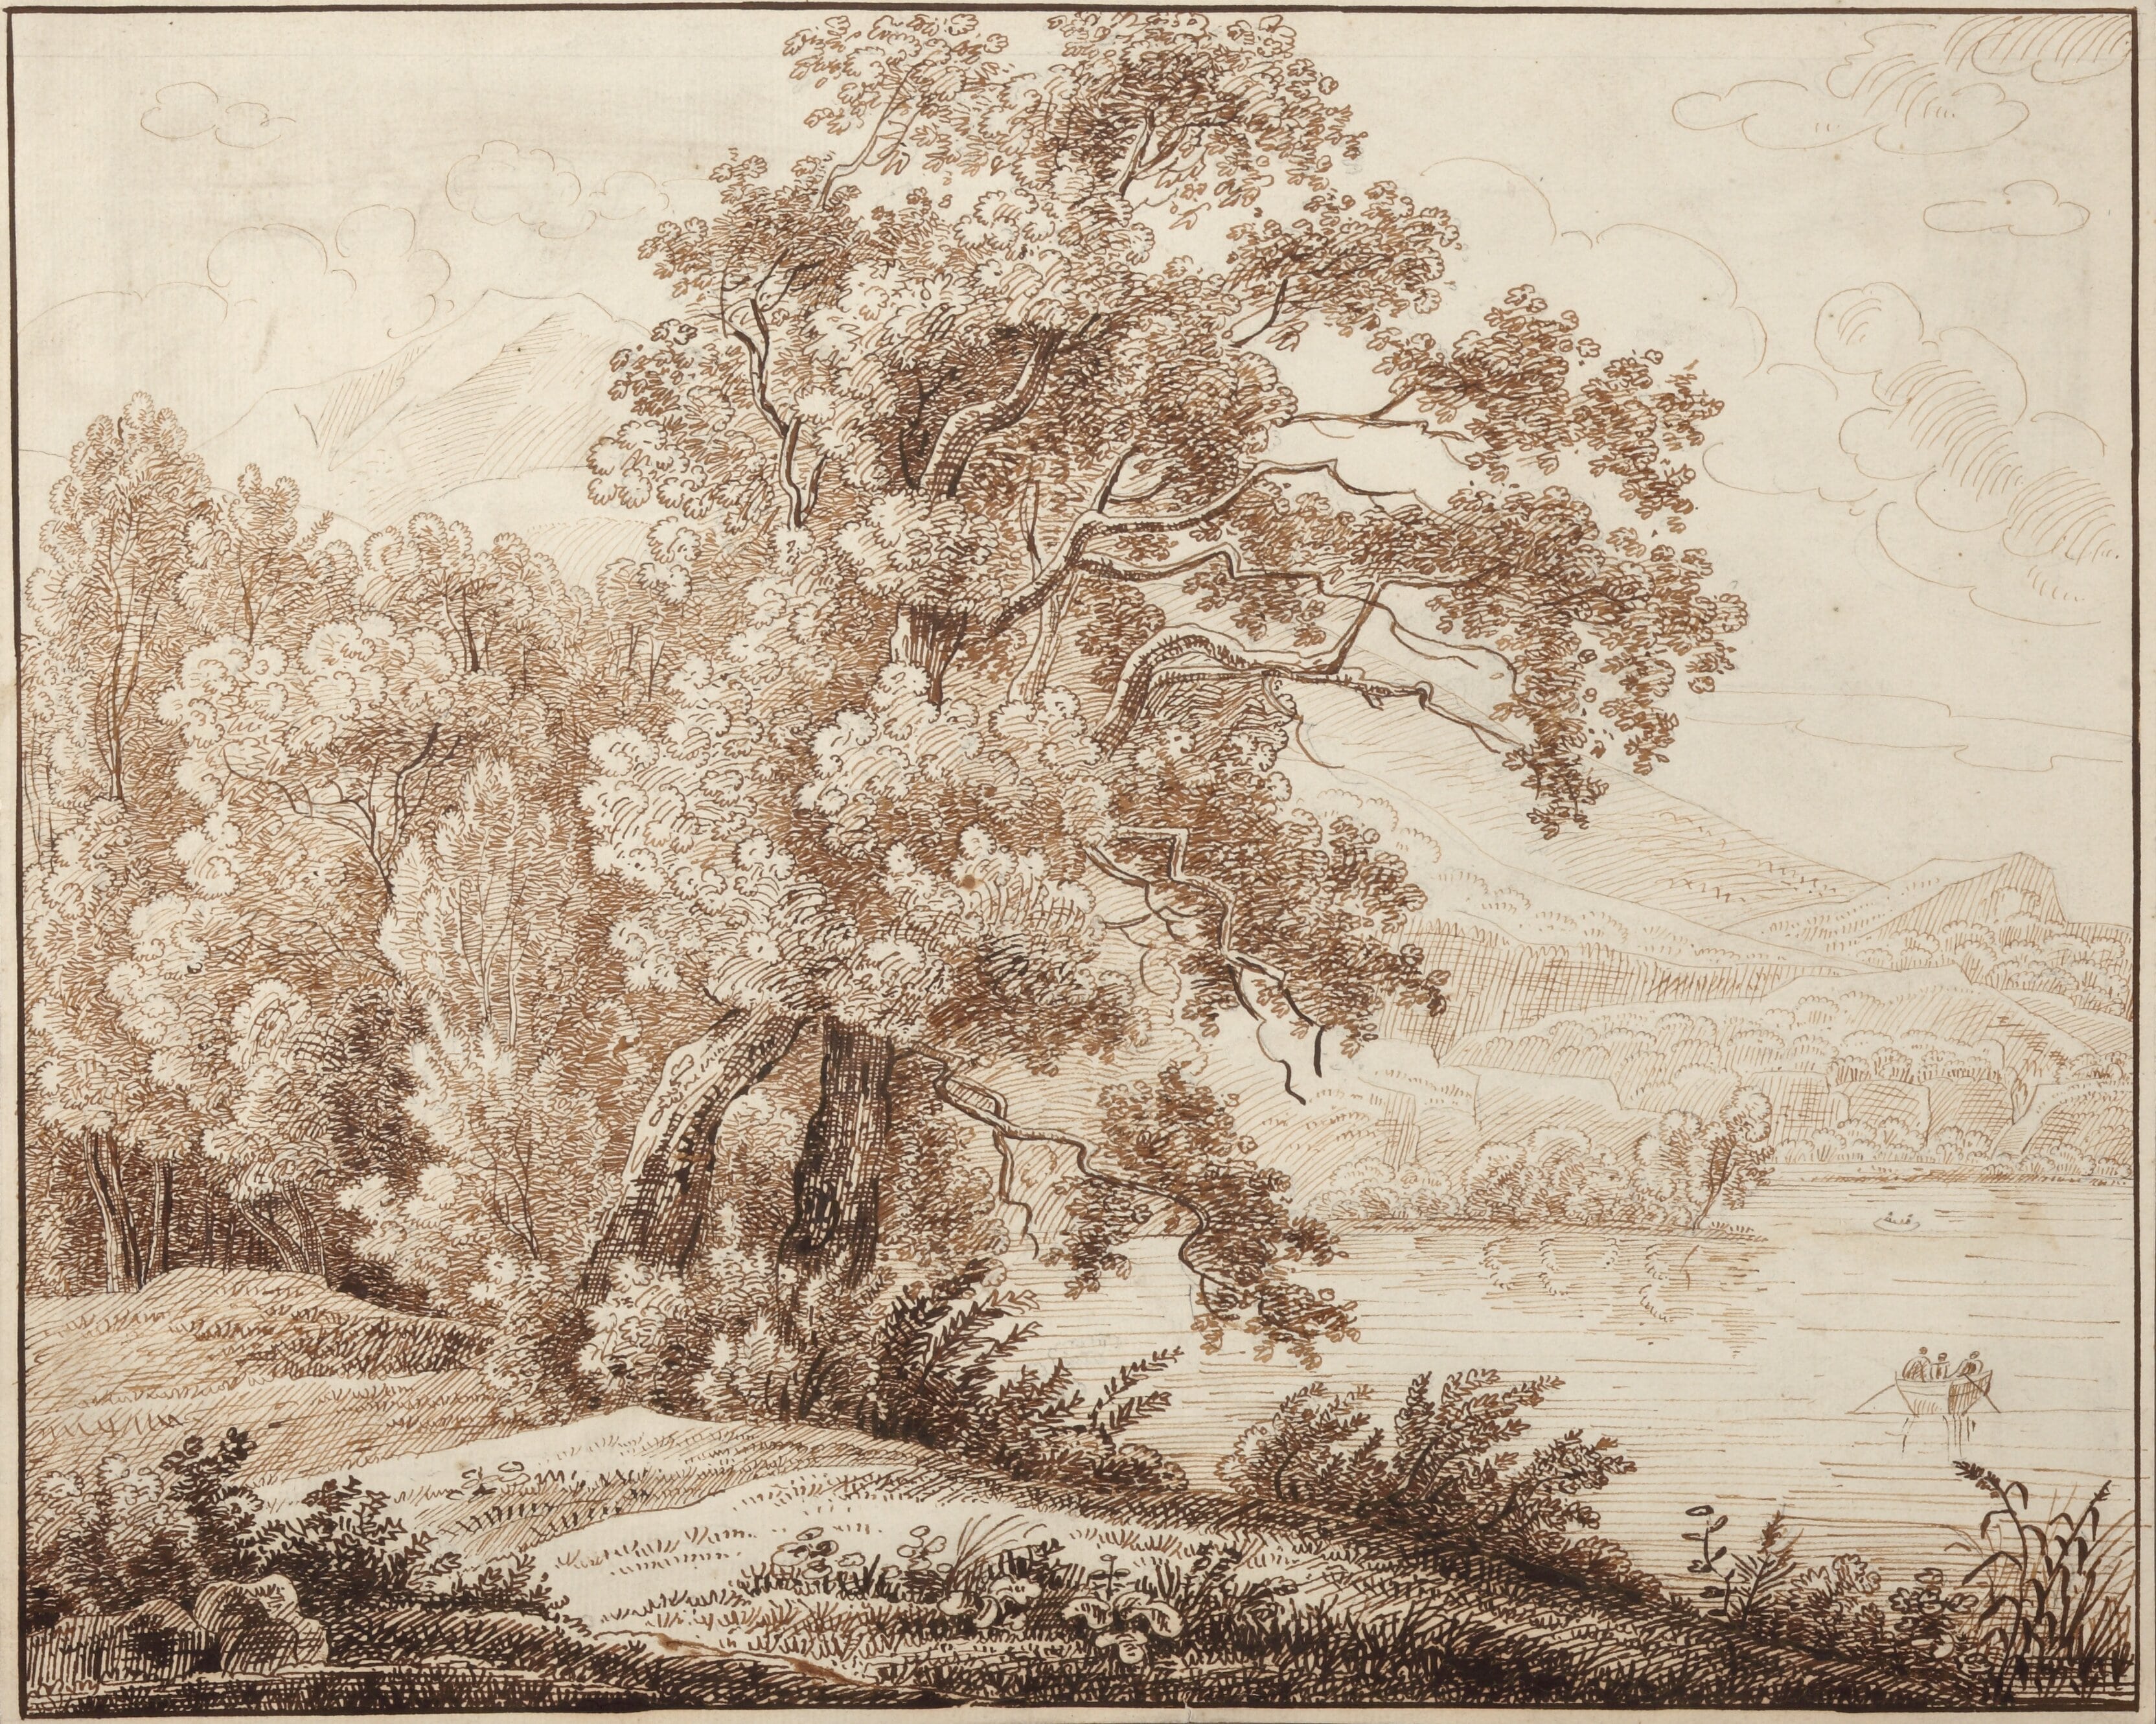 Unknown-Artist-Tree-and-Lake-with-Figures-in-Rowboat